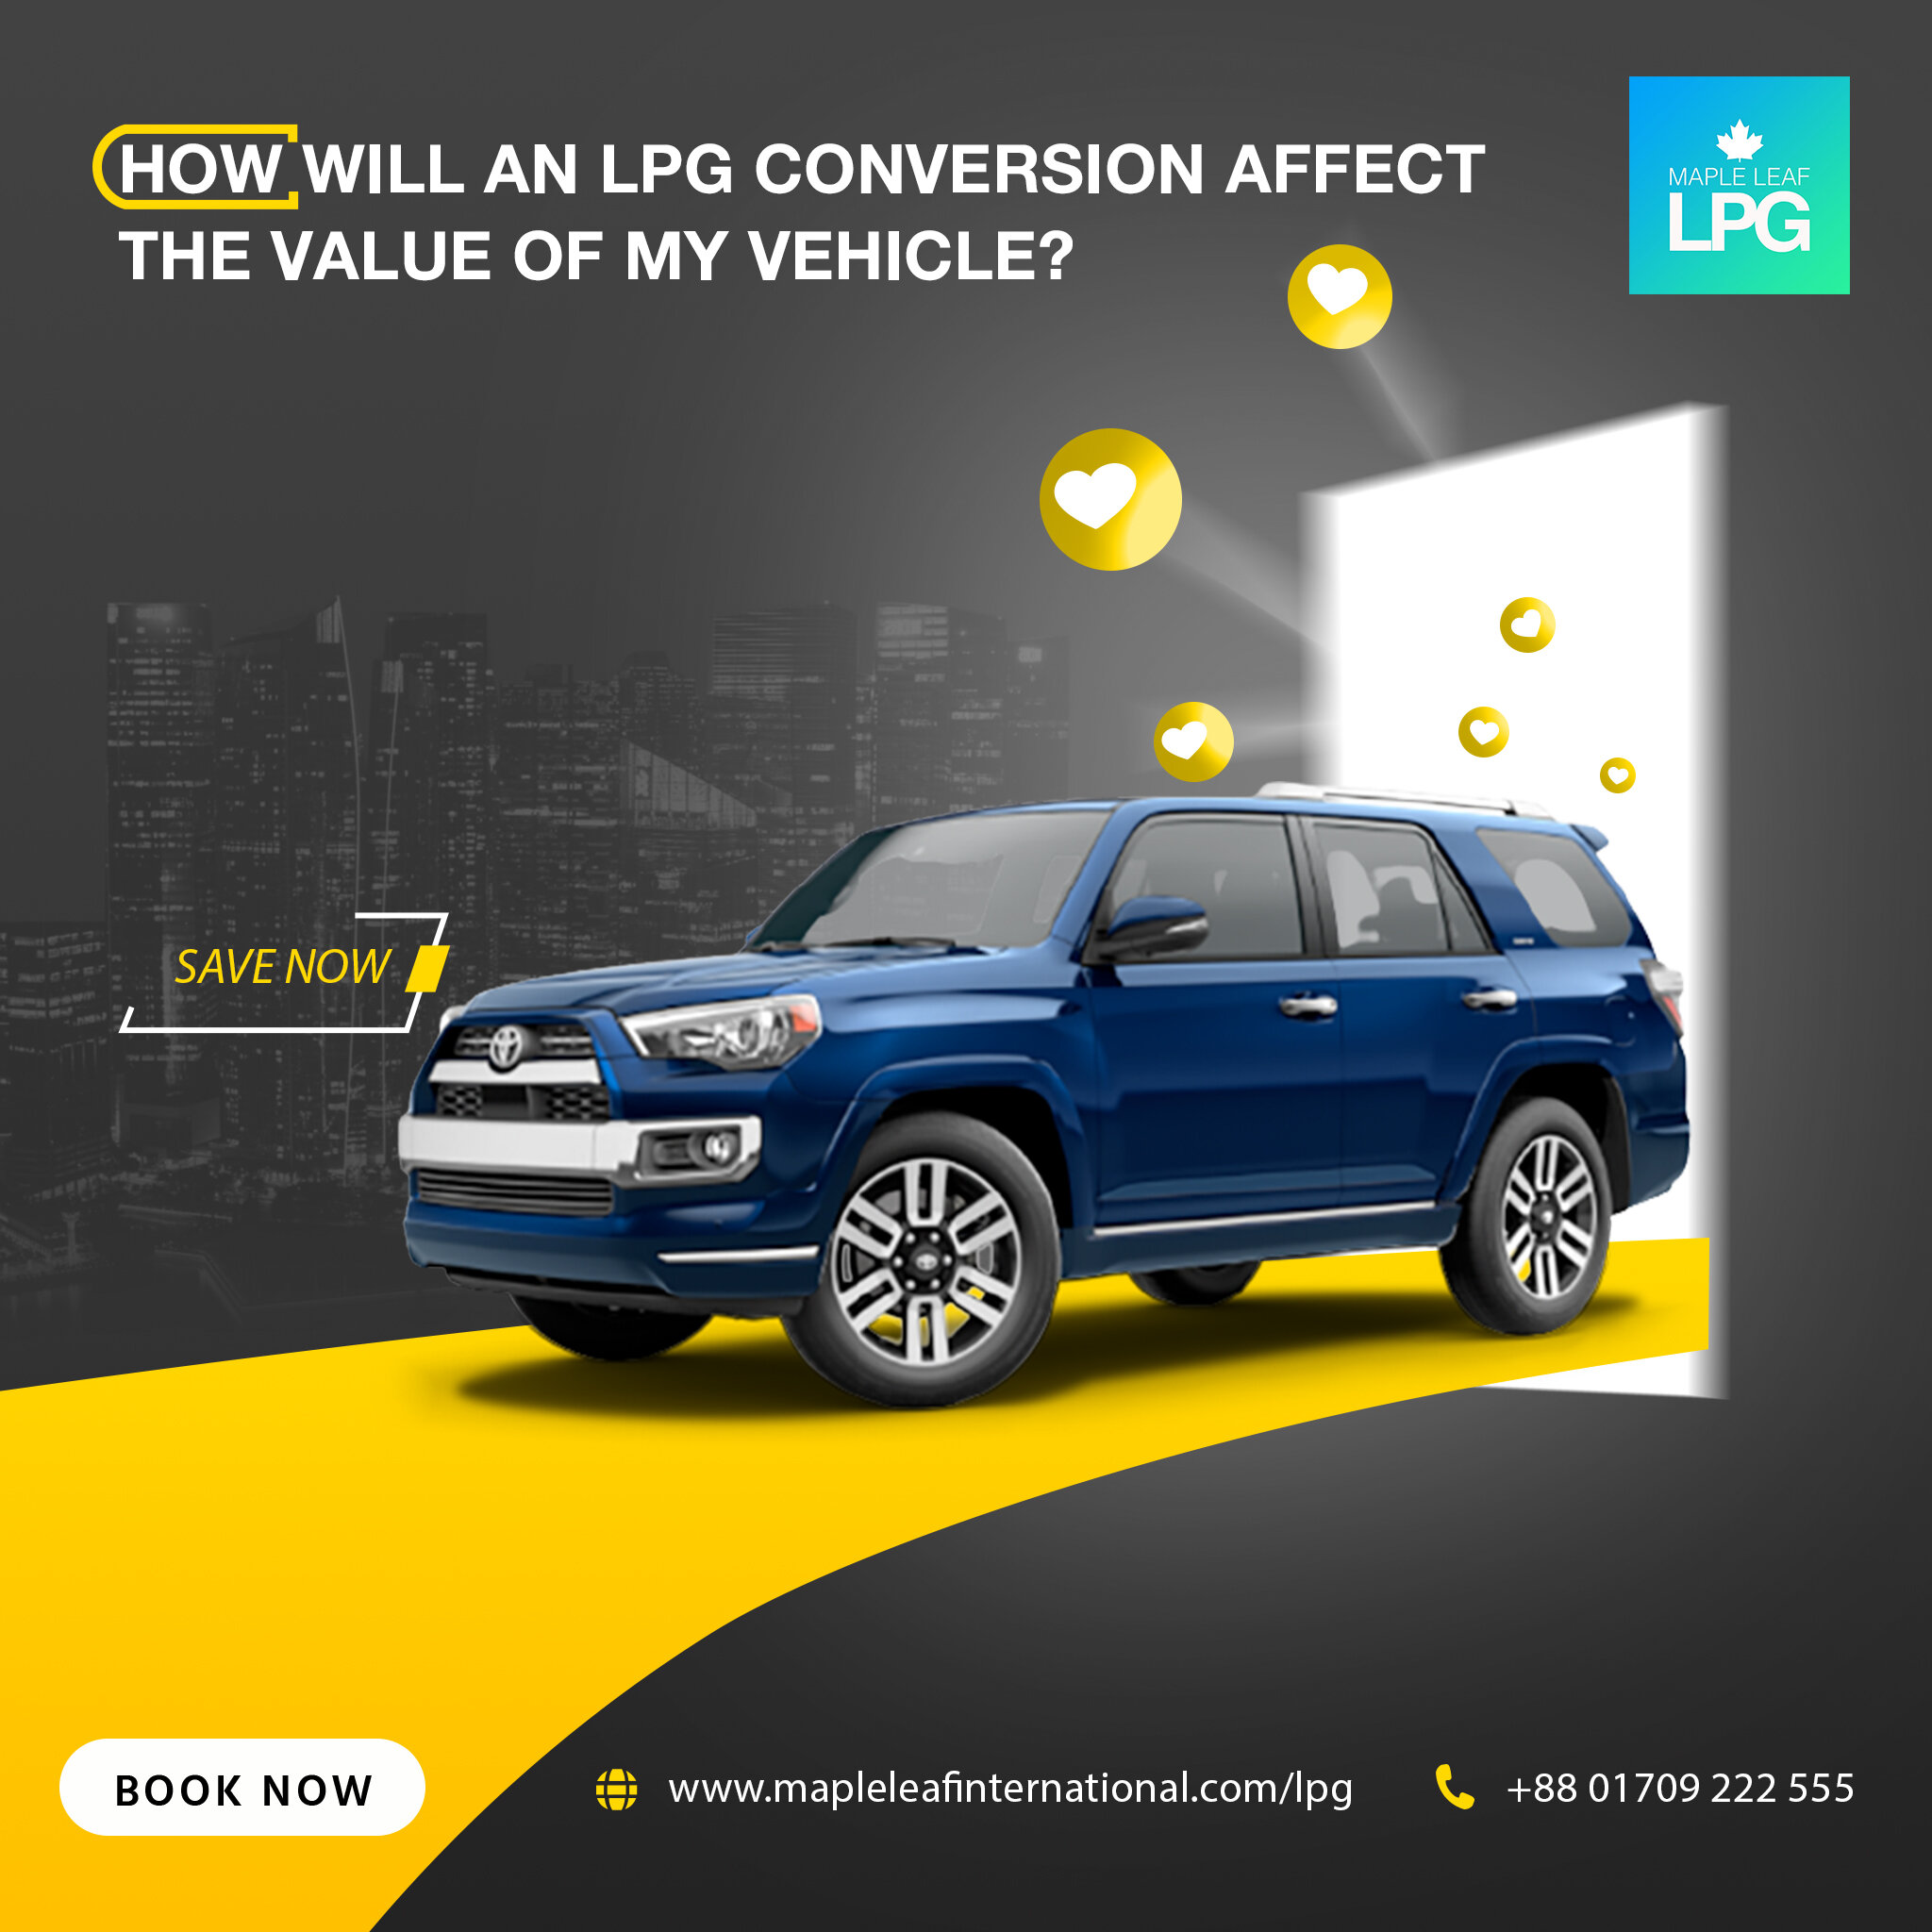 how-will-an-lpg-conversion-affect-the-value-of-my-vehicle-maple-leaf